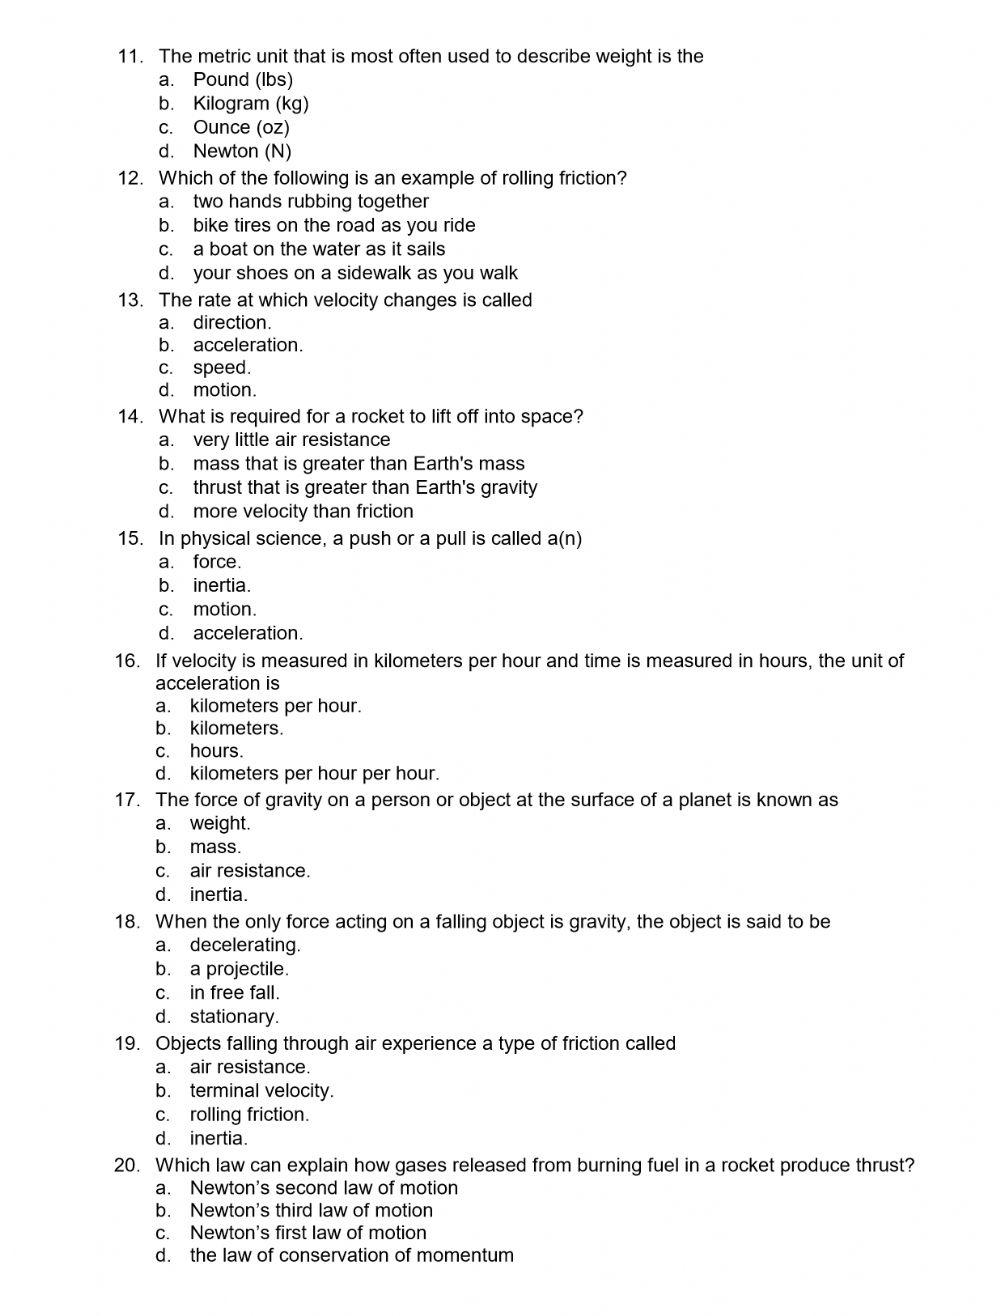 PS-10-Assessment page 2